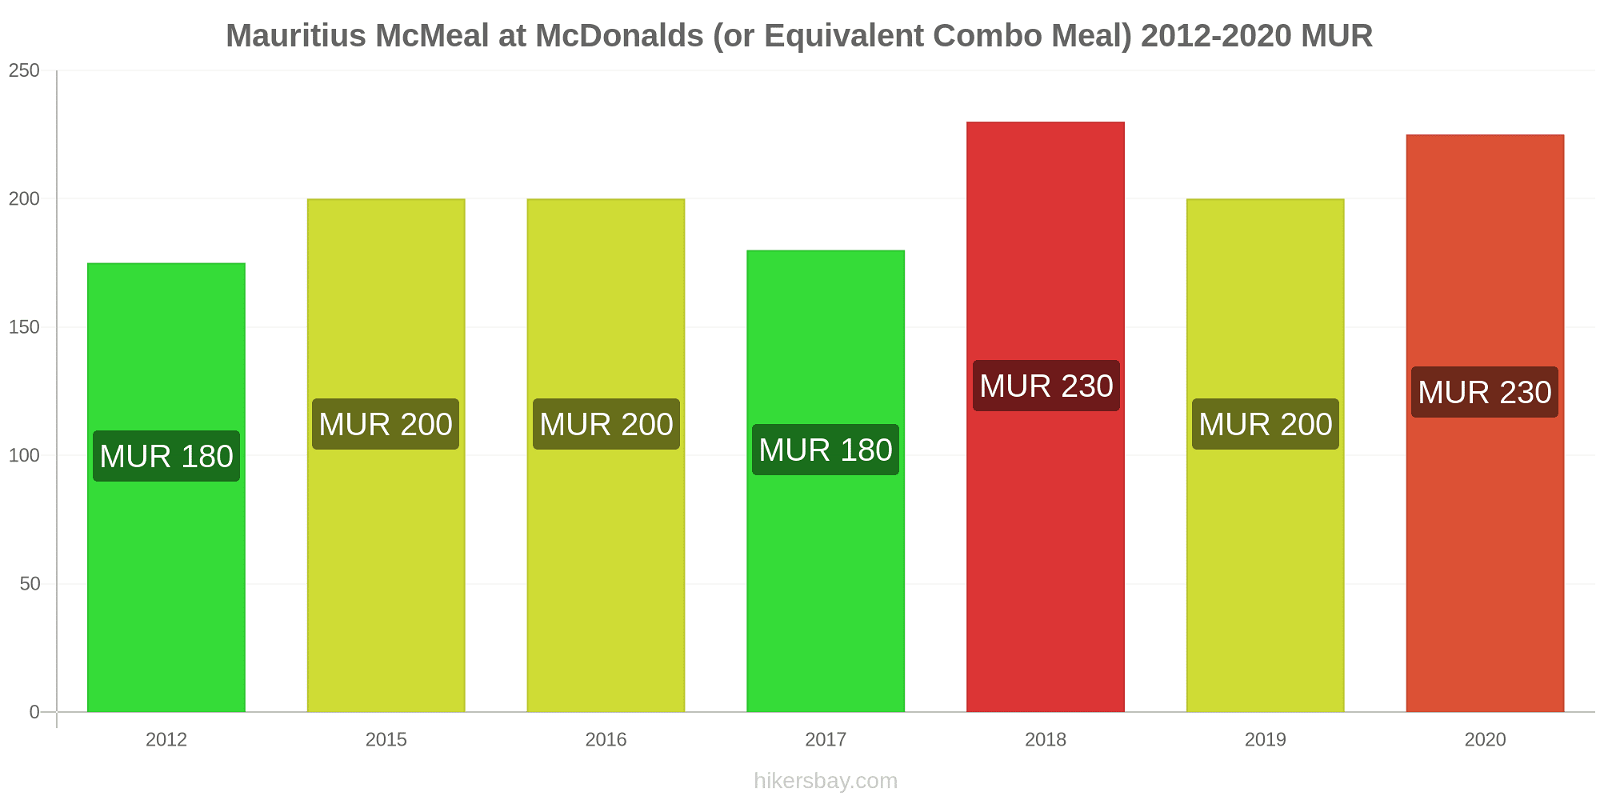 Mauritius price changes McMeal at McDonalds (or Equivalent Combo Meal) hikersbay.com